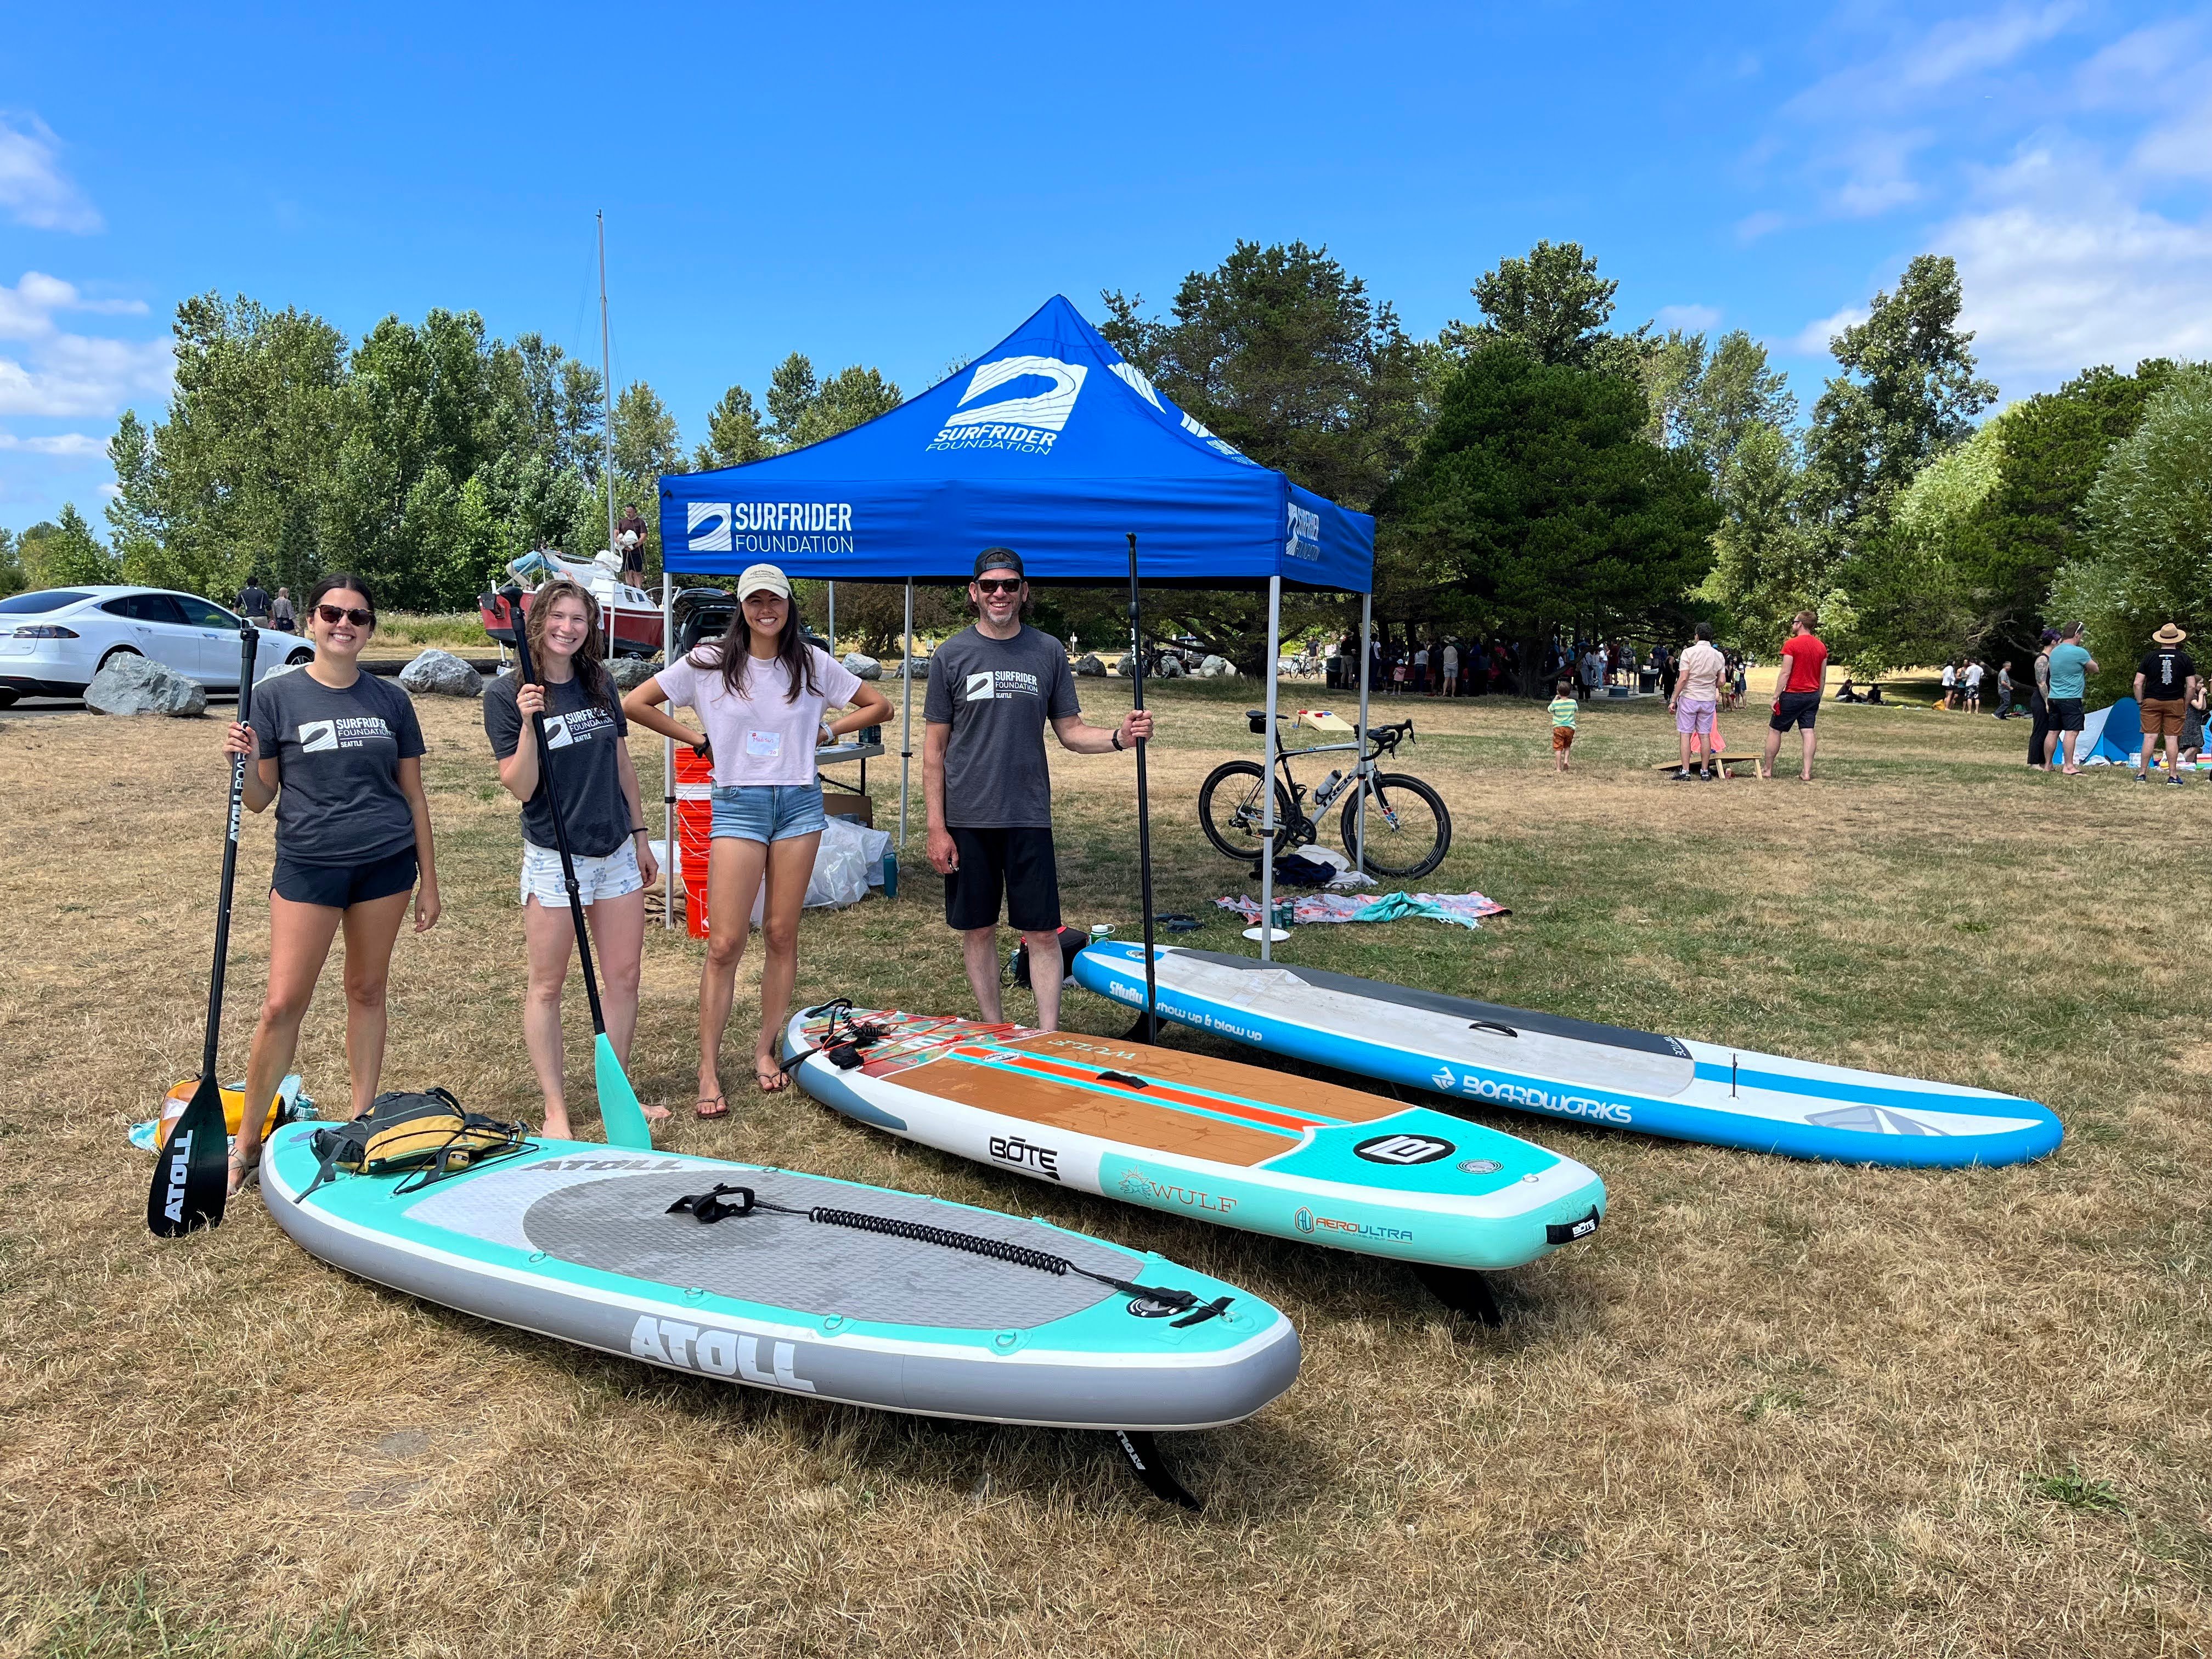 Surfrider members at a Clean and Cruise event with their paddle boards.